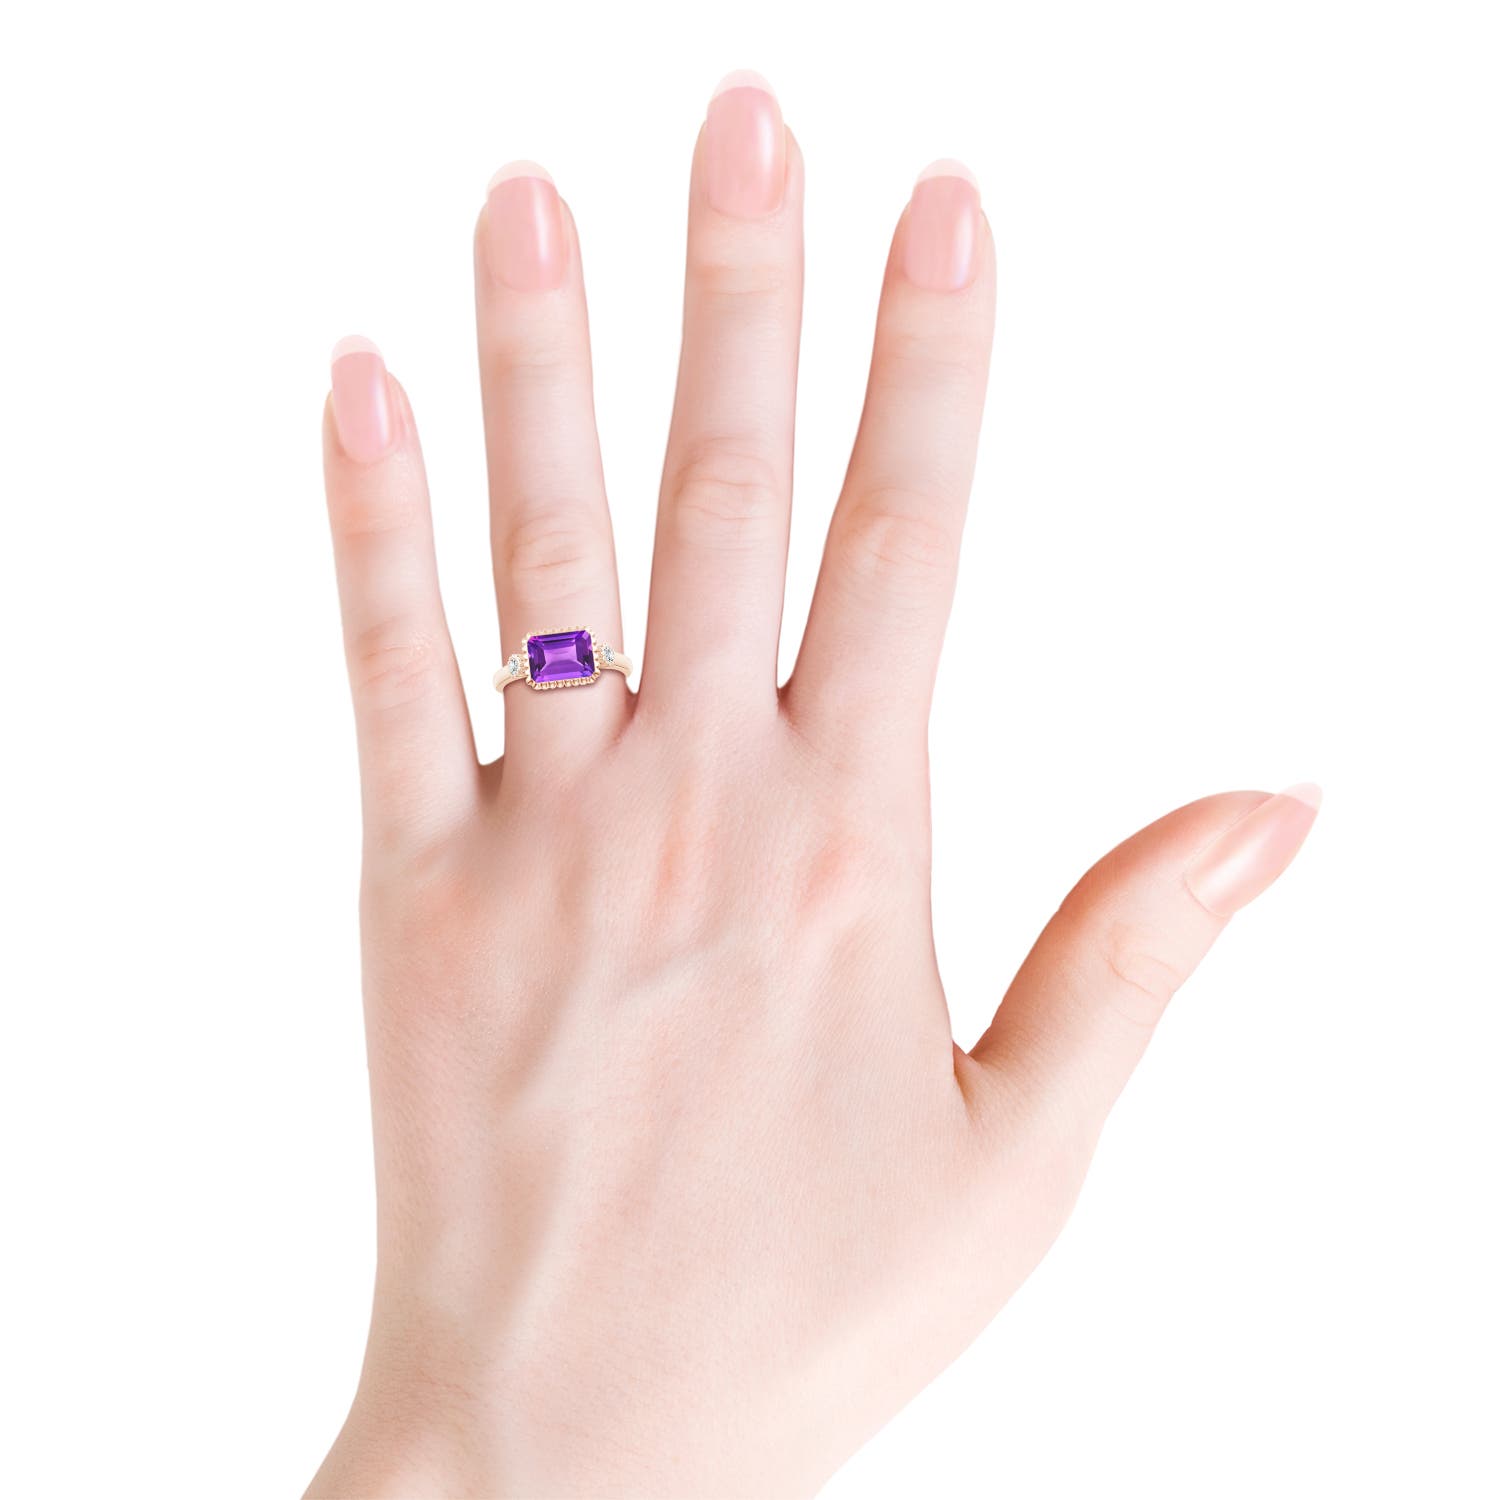 AAA - Amethyst / 2.34 CT / 14 KT Rose Gold